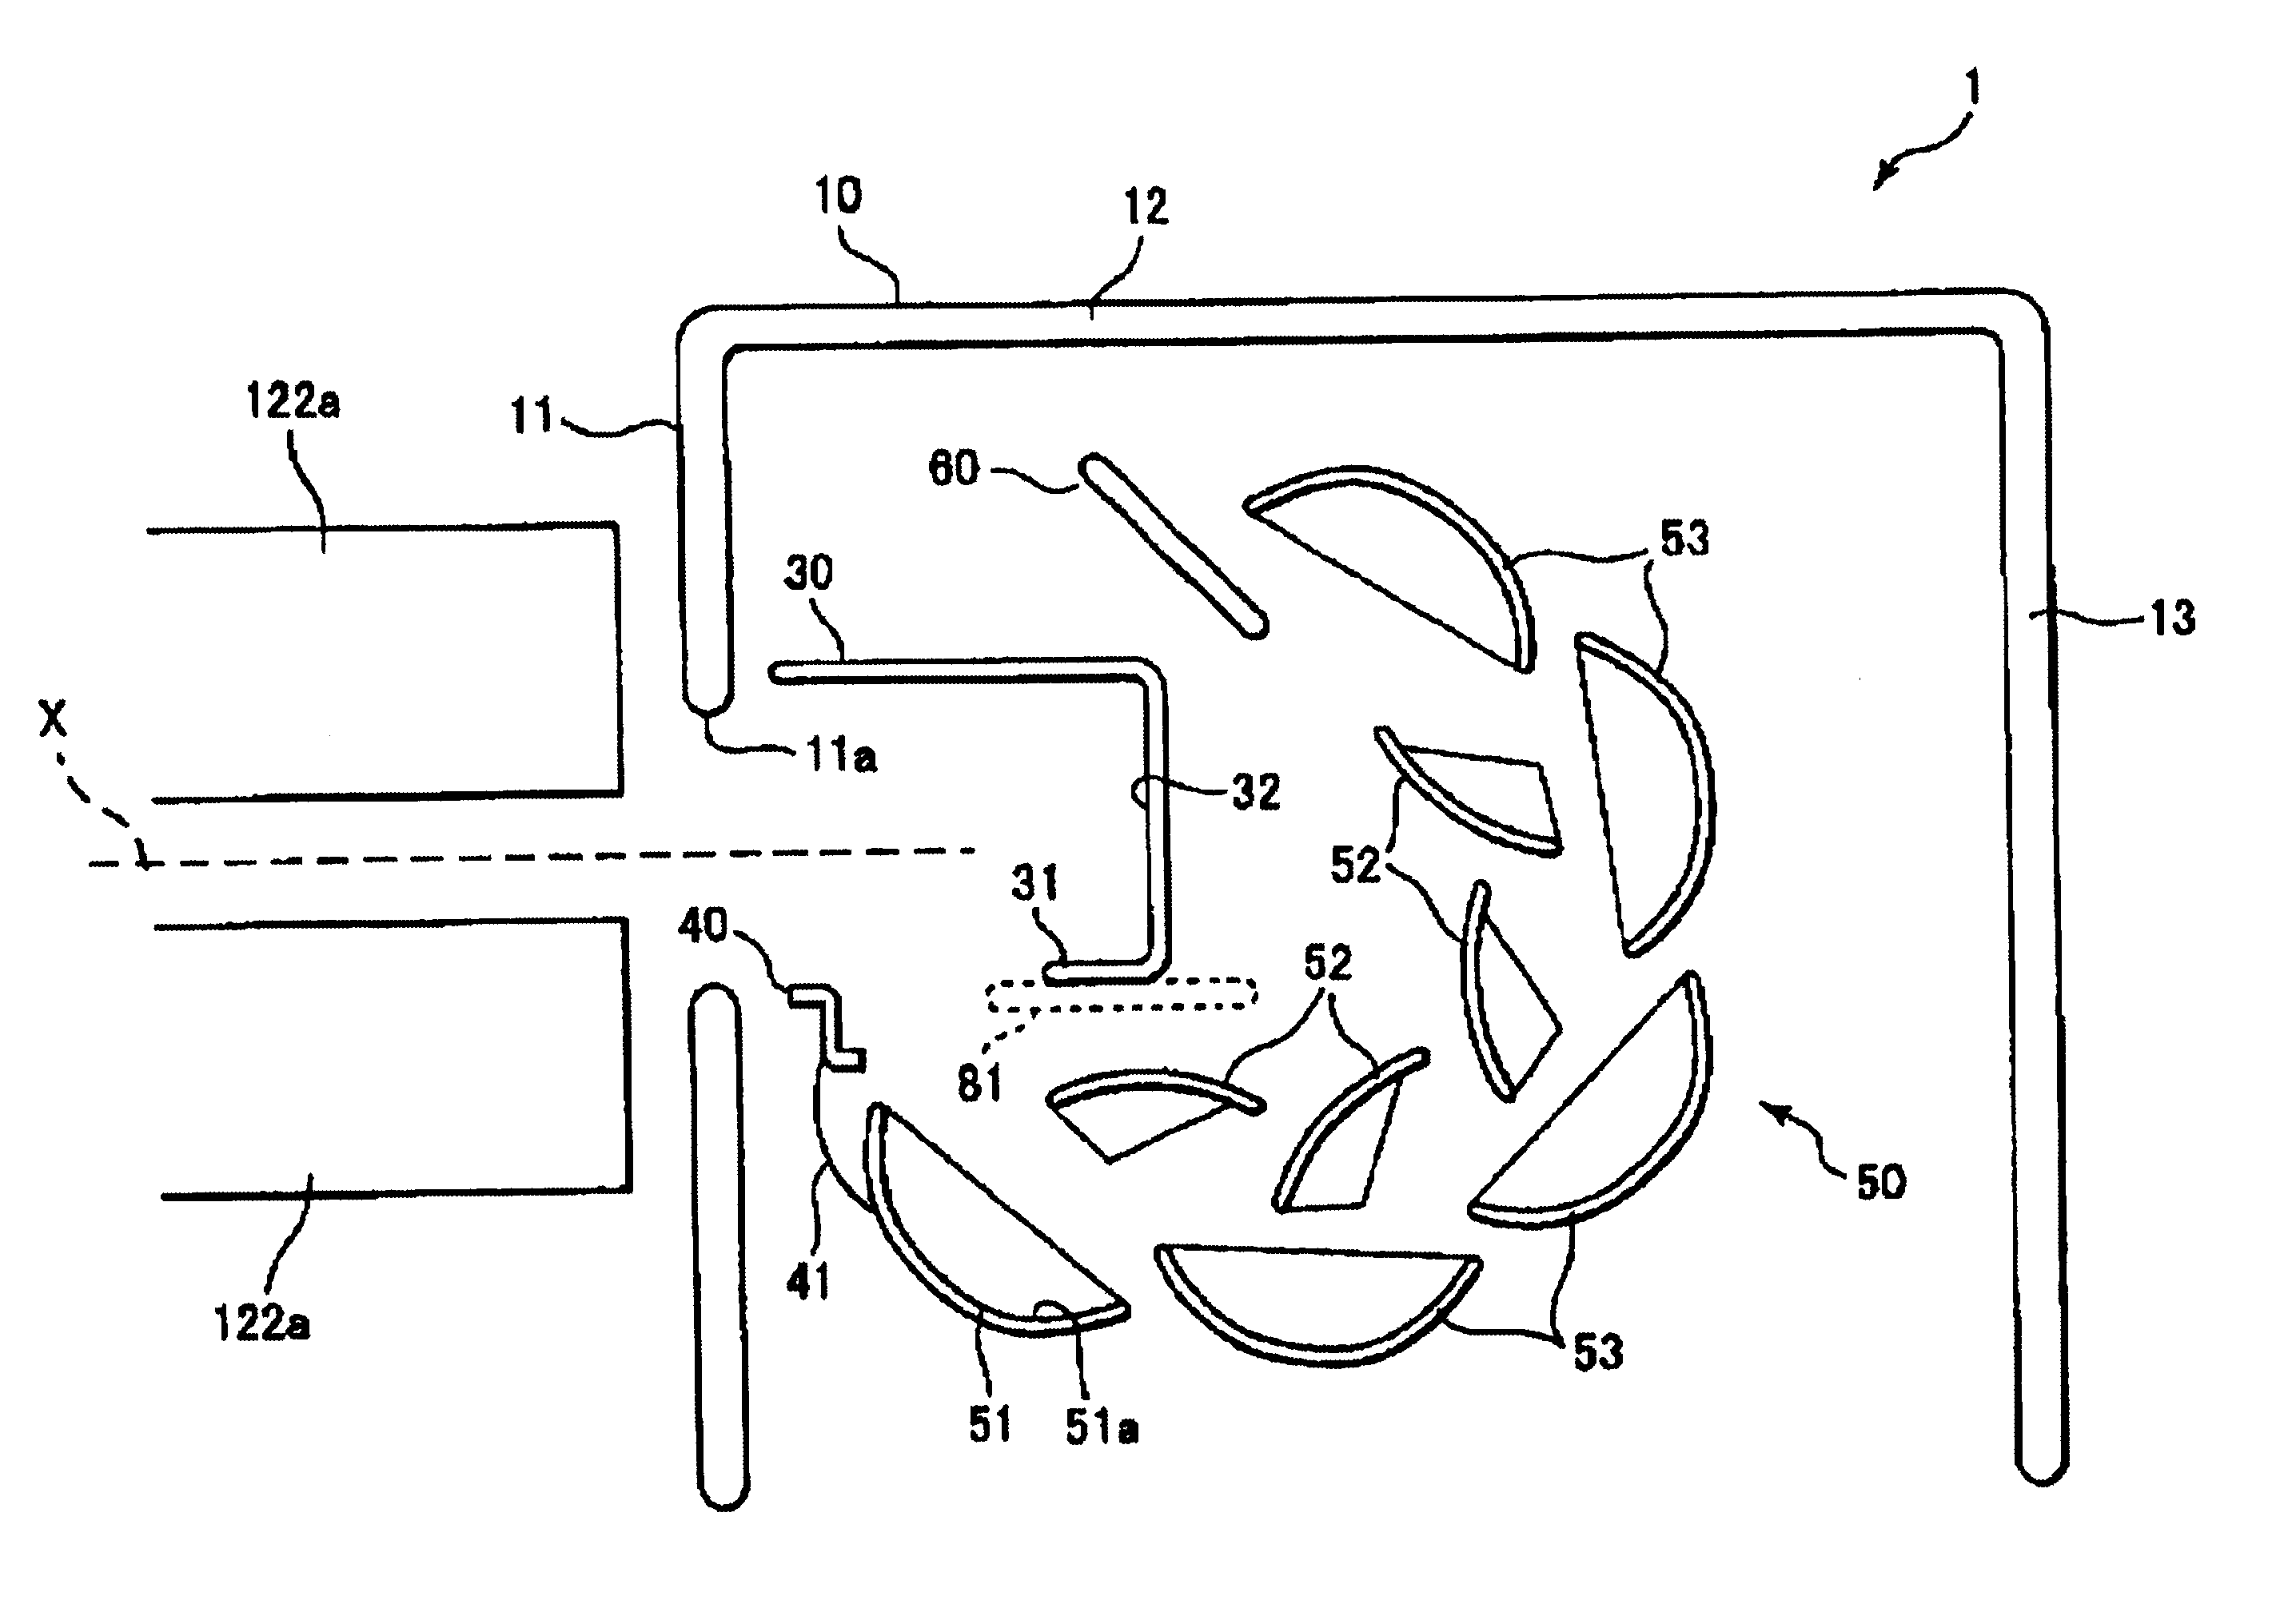 Mass spectrometer and ion detector used therein